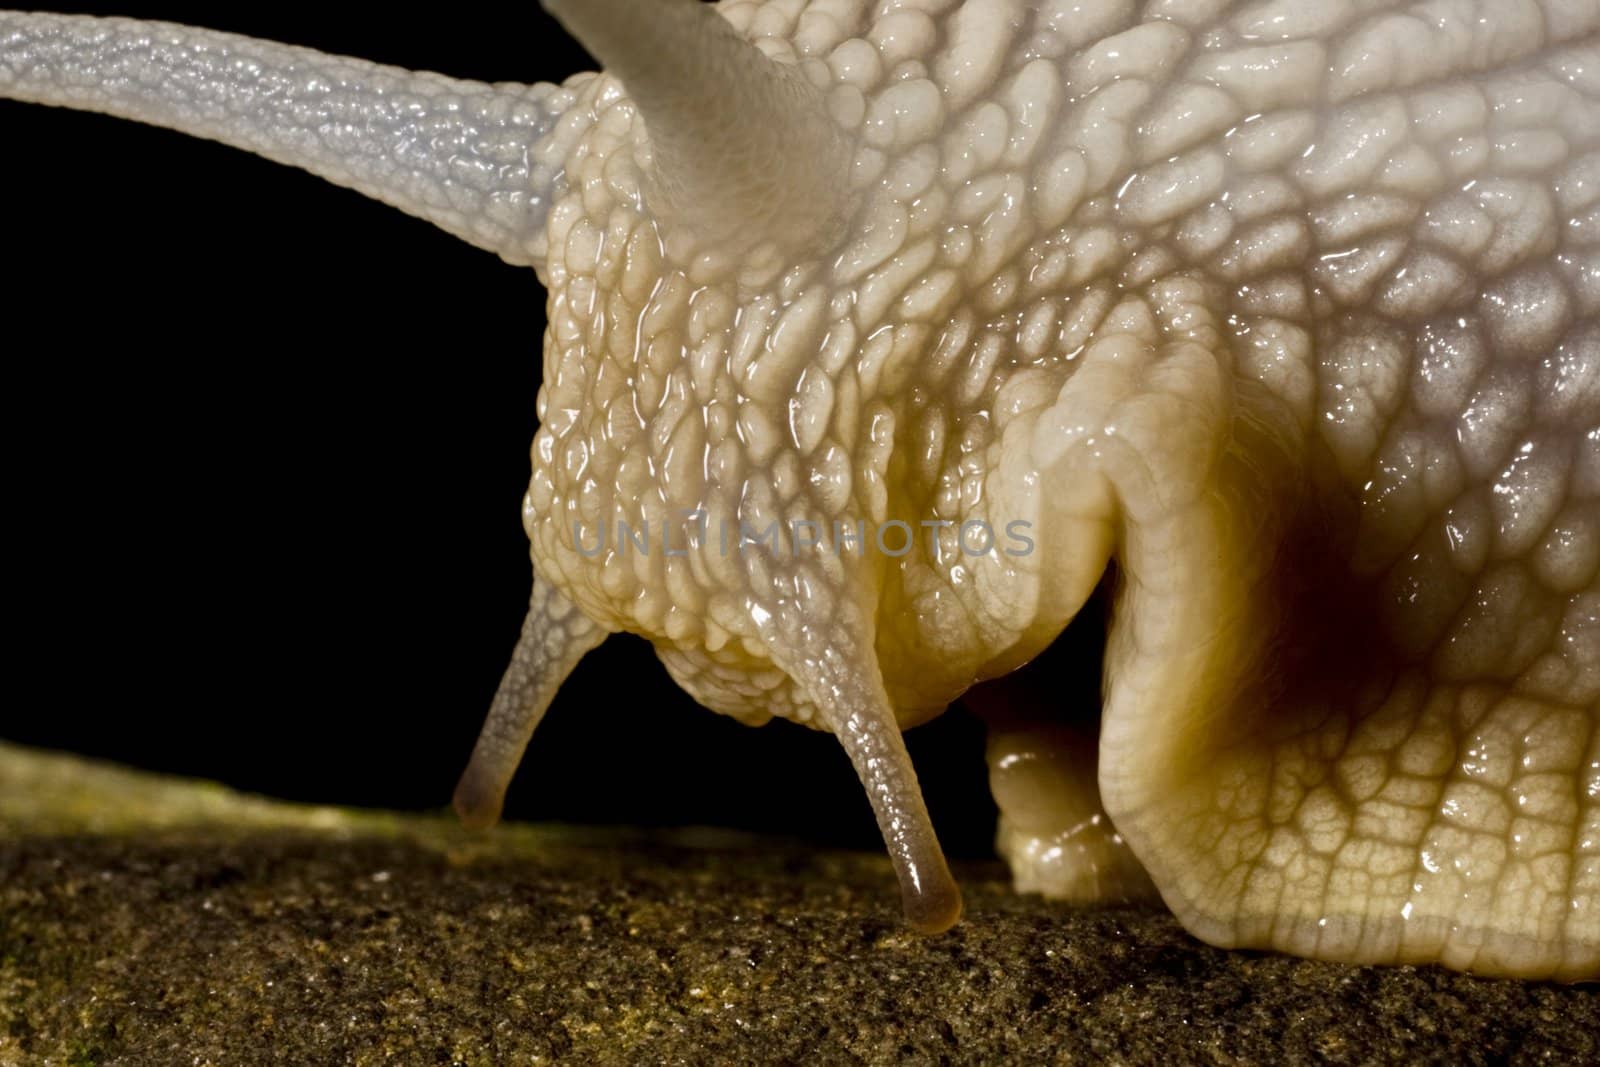 head of snail, close-up view